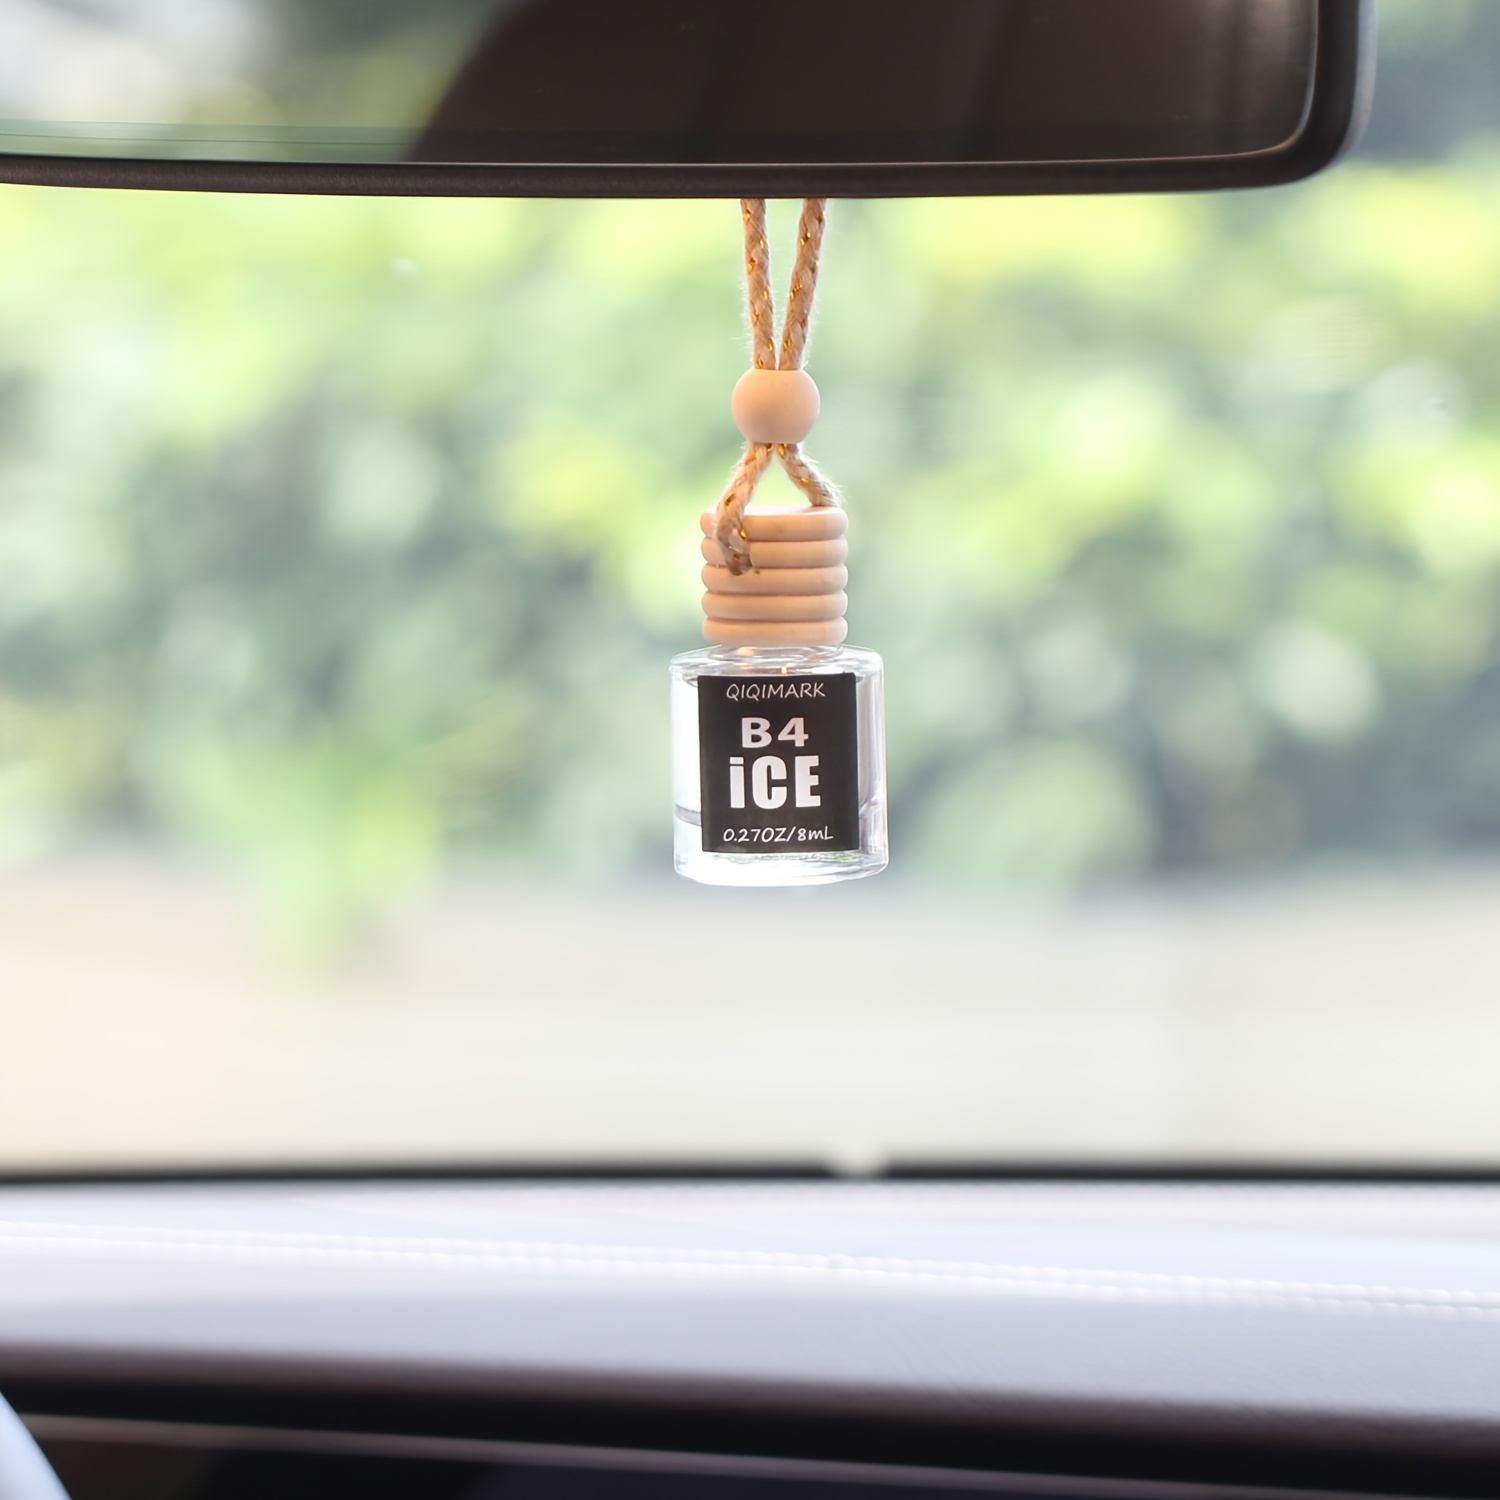 

Car Air Hanging Fragrance Oil Diffuser, Car Air Freshener Diffuser For Essential Oils, Scents Fragrance Aromatherapy Automobile Diffuser, Long Lasting Car Diffuser Bottle 1 Pack ()